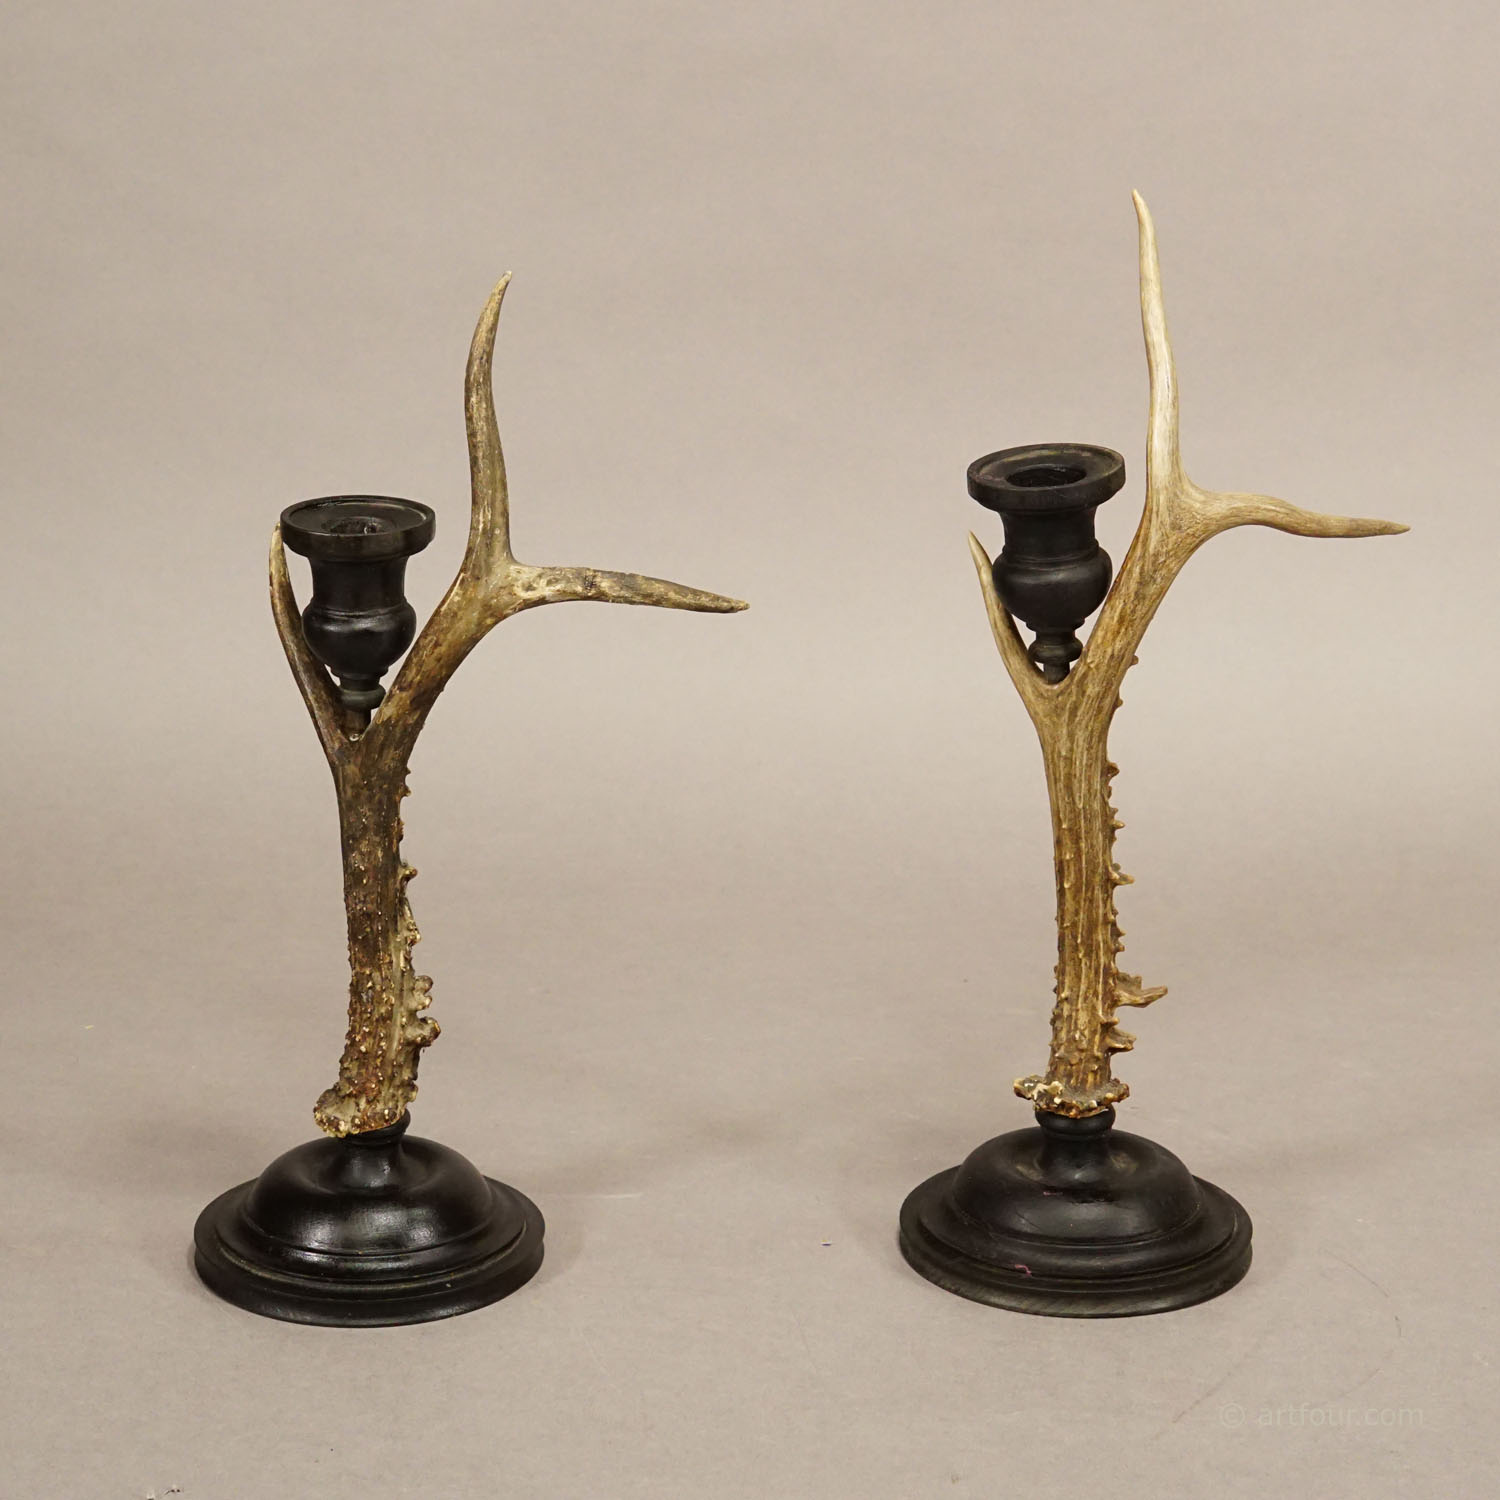 A Pair Vintage Black Forest Candle Holders with Wooden Base and Spout, Germany ca. 1930s